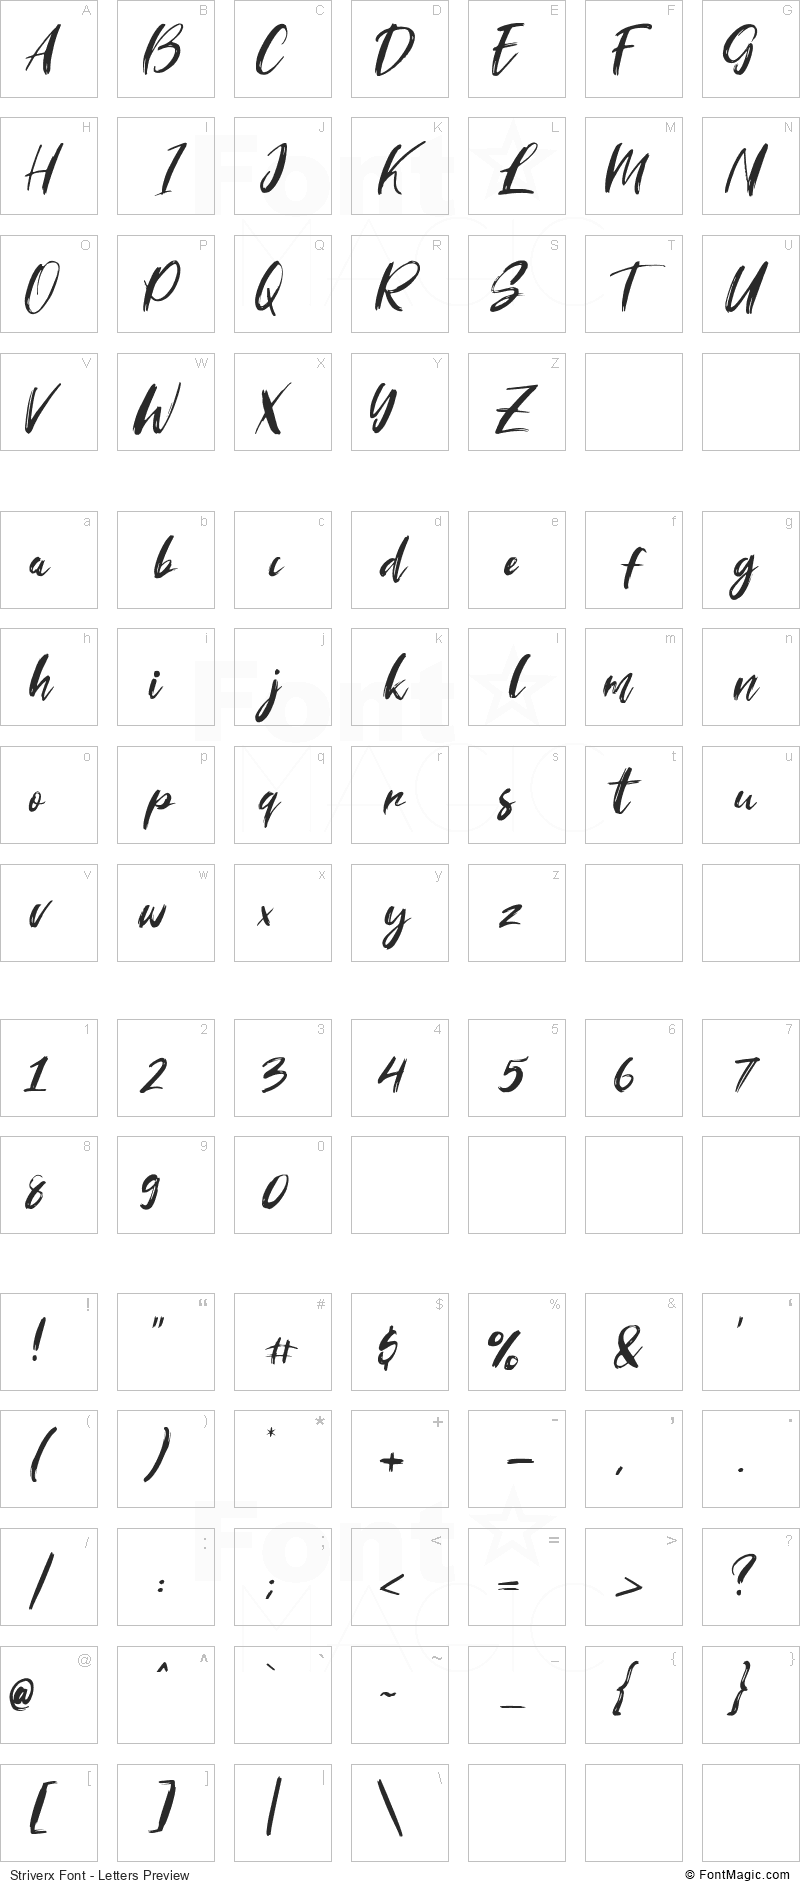 Striverx Font - All Latters Preview Chart